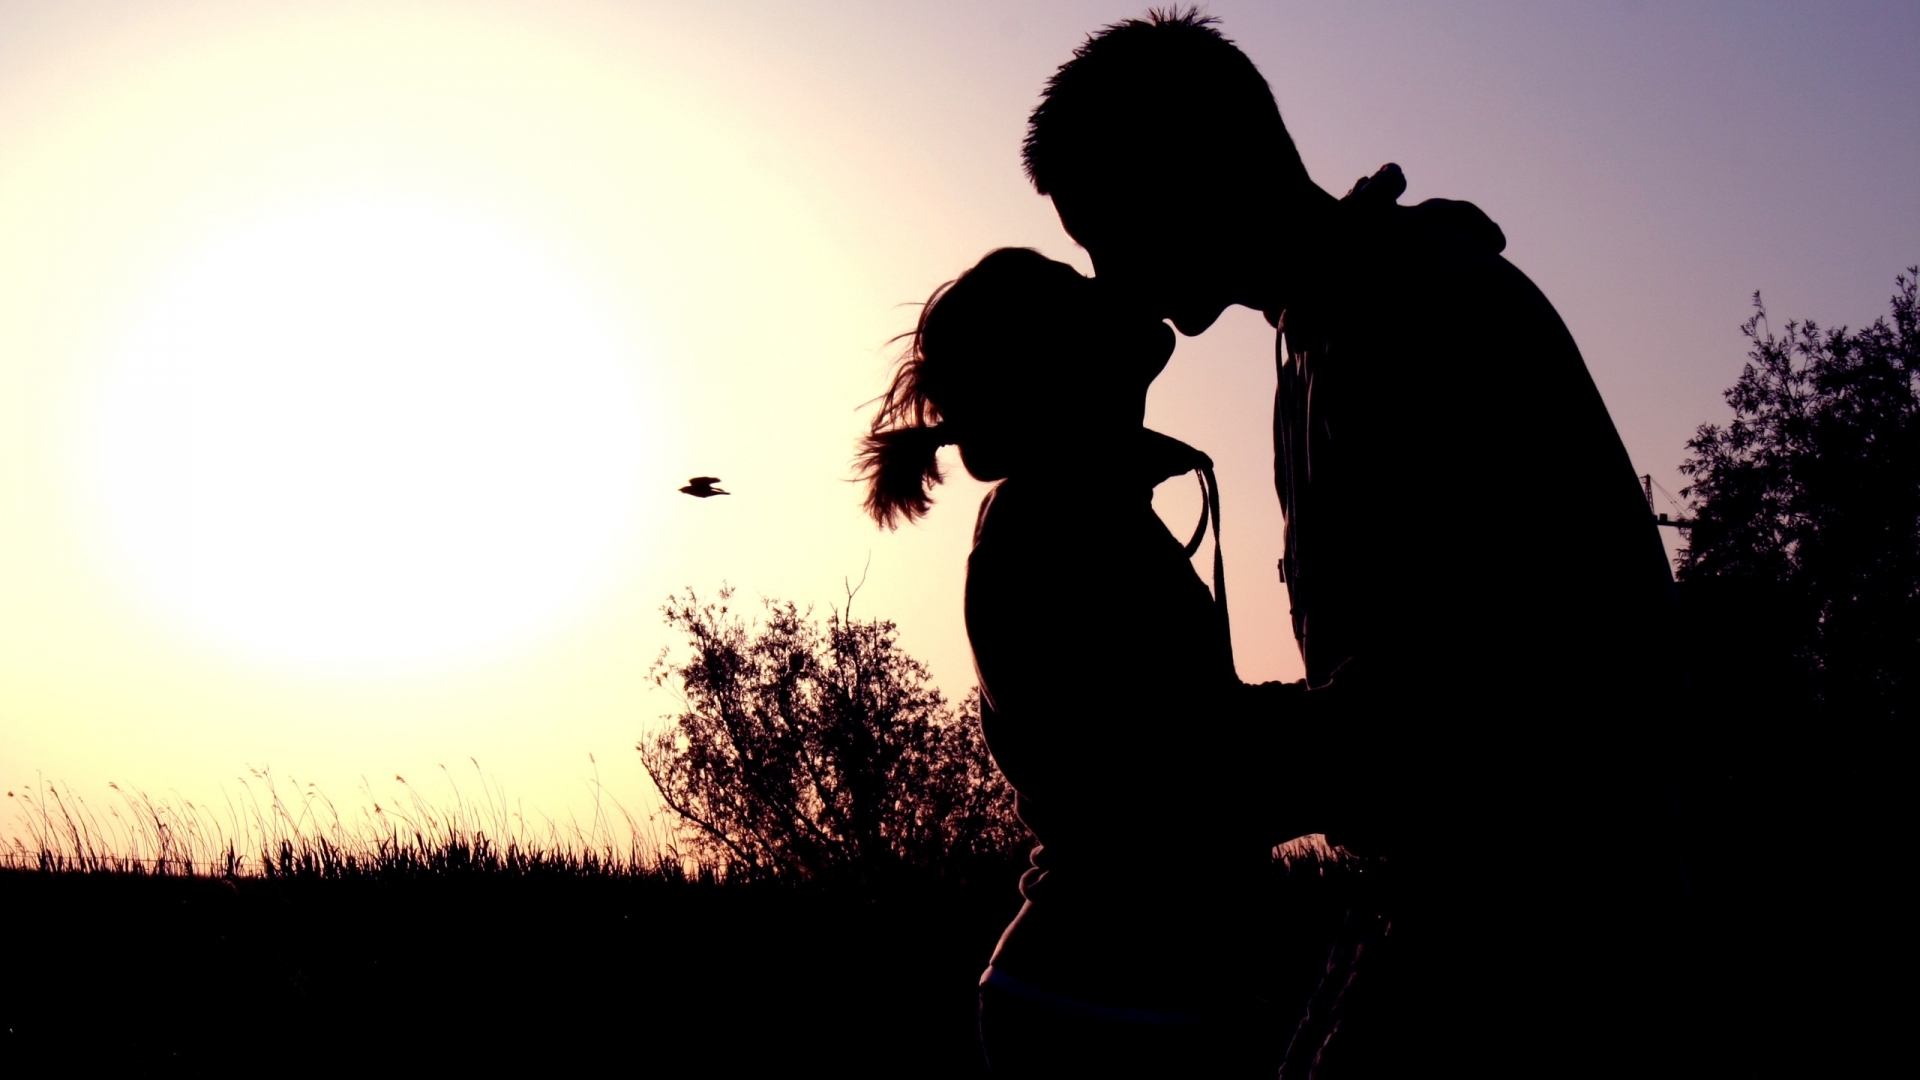 couple wallpaper,people in nature,photograph,backlighting,romance,sky